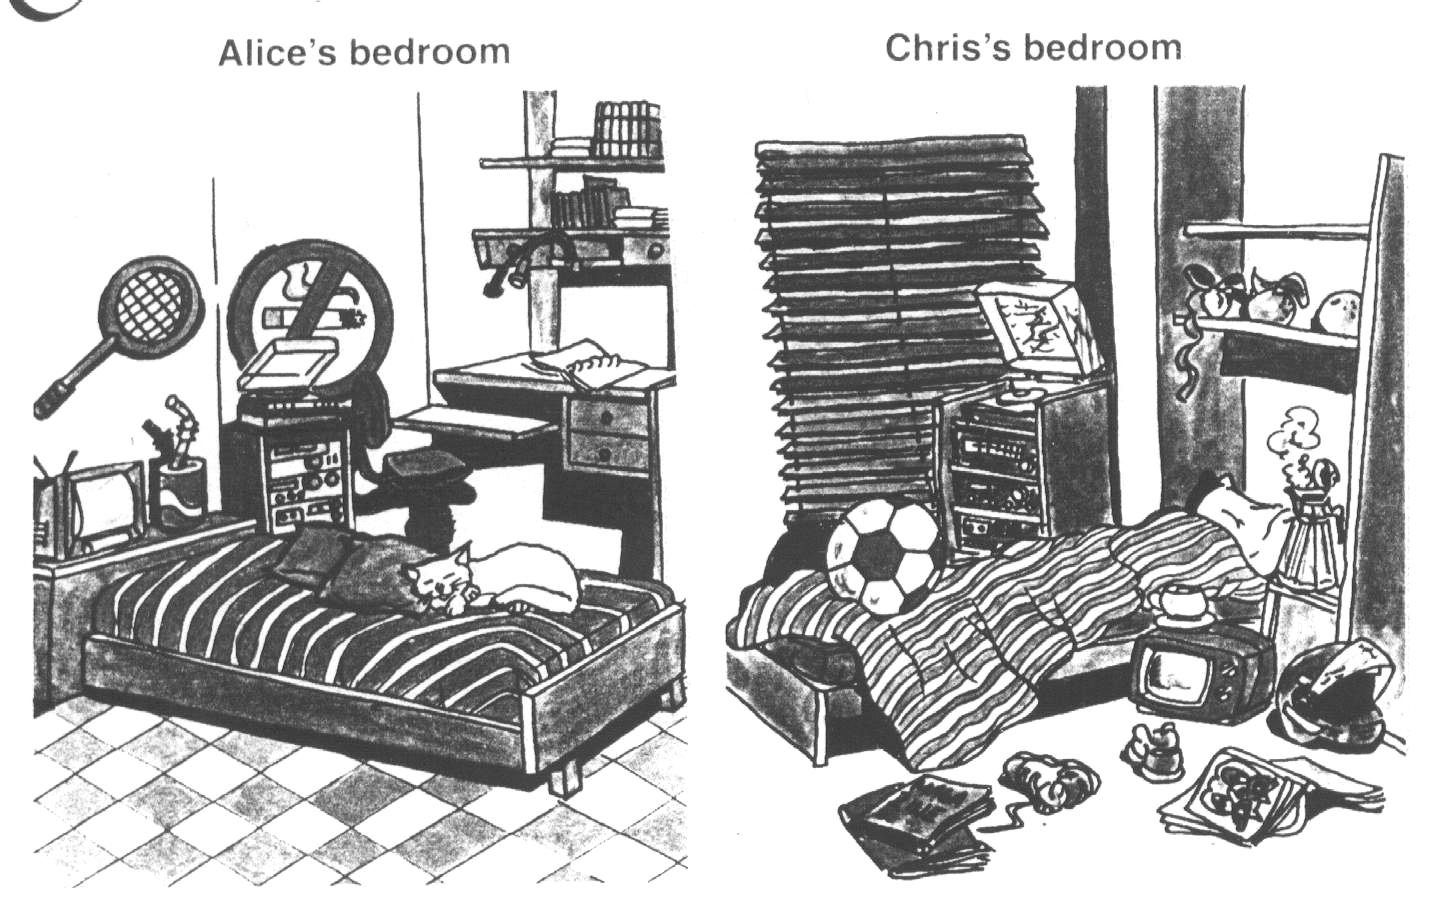 Tidies his room. Look at the pictures ask and answer as in the example. Alice's Bedroom. Look at the pictures and answer the questions. Look at the picture and ask and answer questions as in the example.